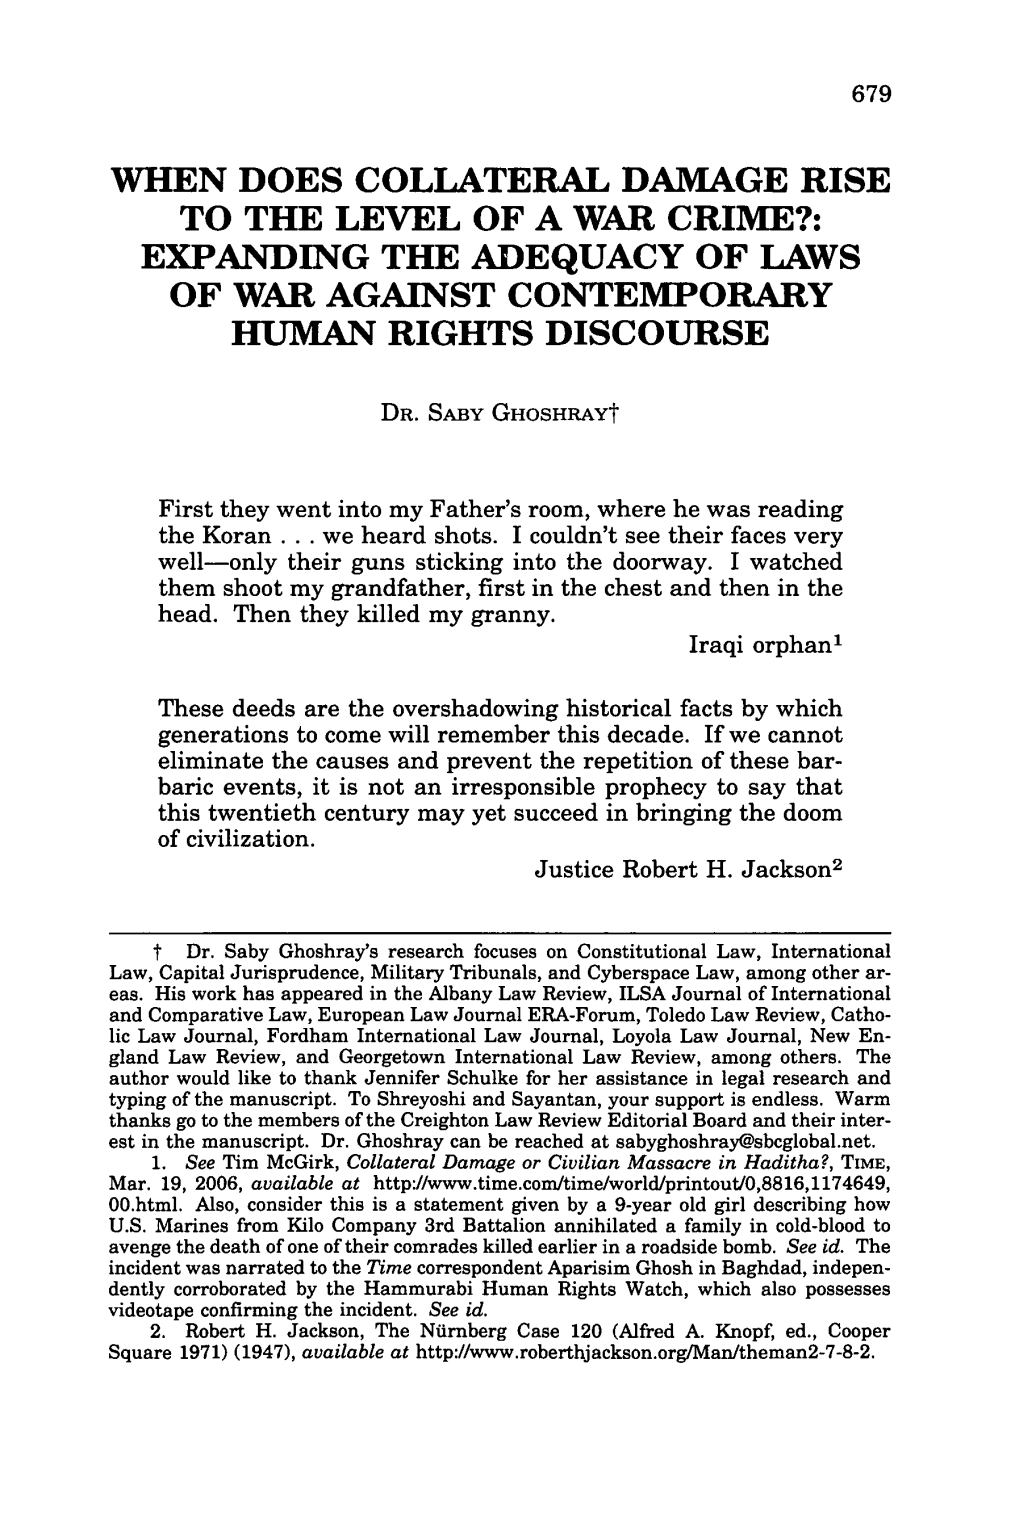 When Does Collateral Damage Rise to the Level of a War Crime: Expanding the Adequacy of Laws of War Against Contemporary Human R